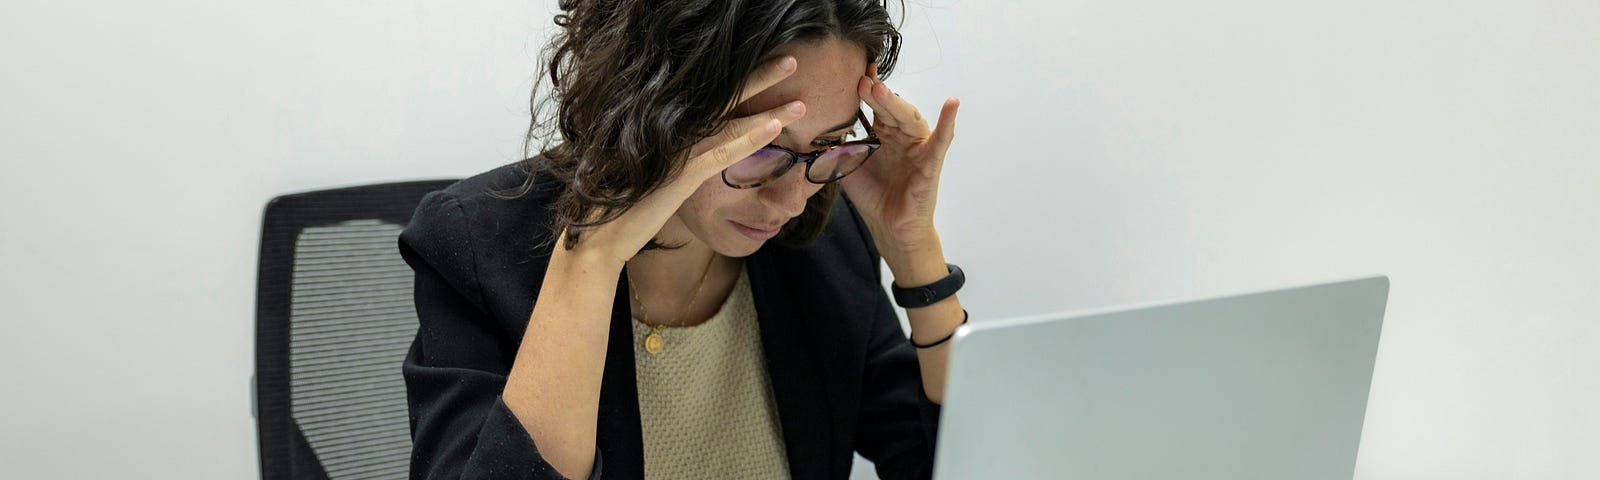 Woman sitting at a desk, focused very intently on her laptop.